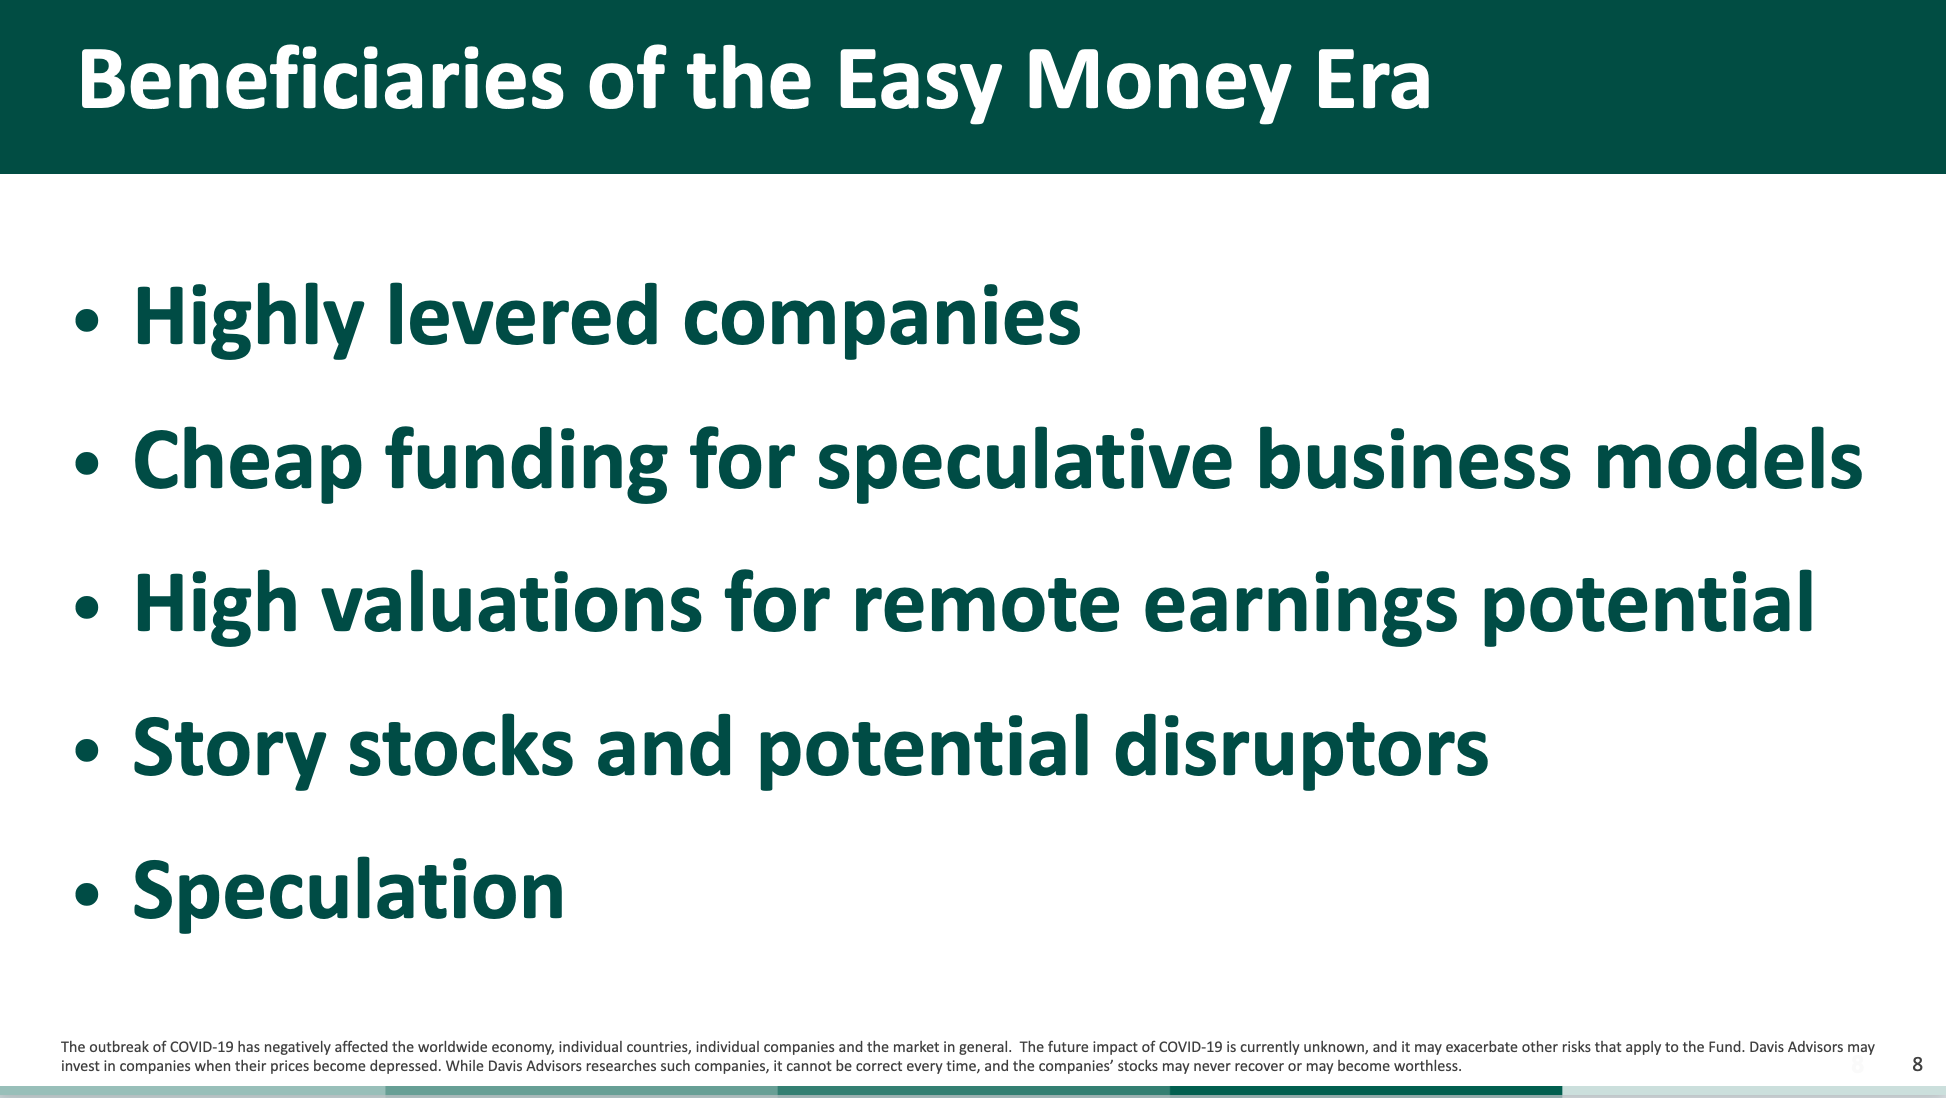 The Easy Money Era – Who Was Helped 